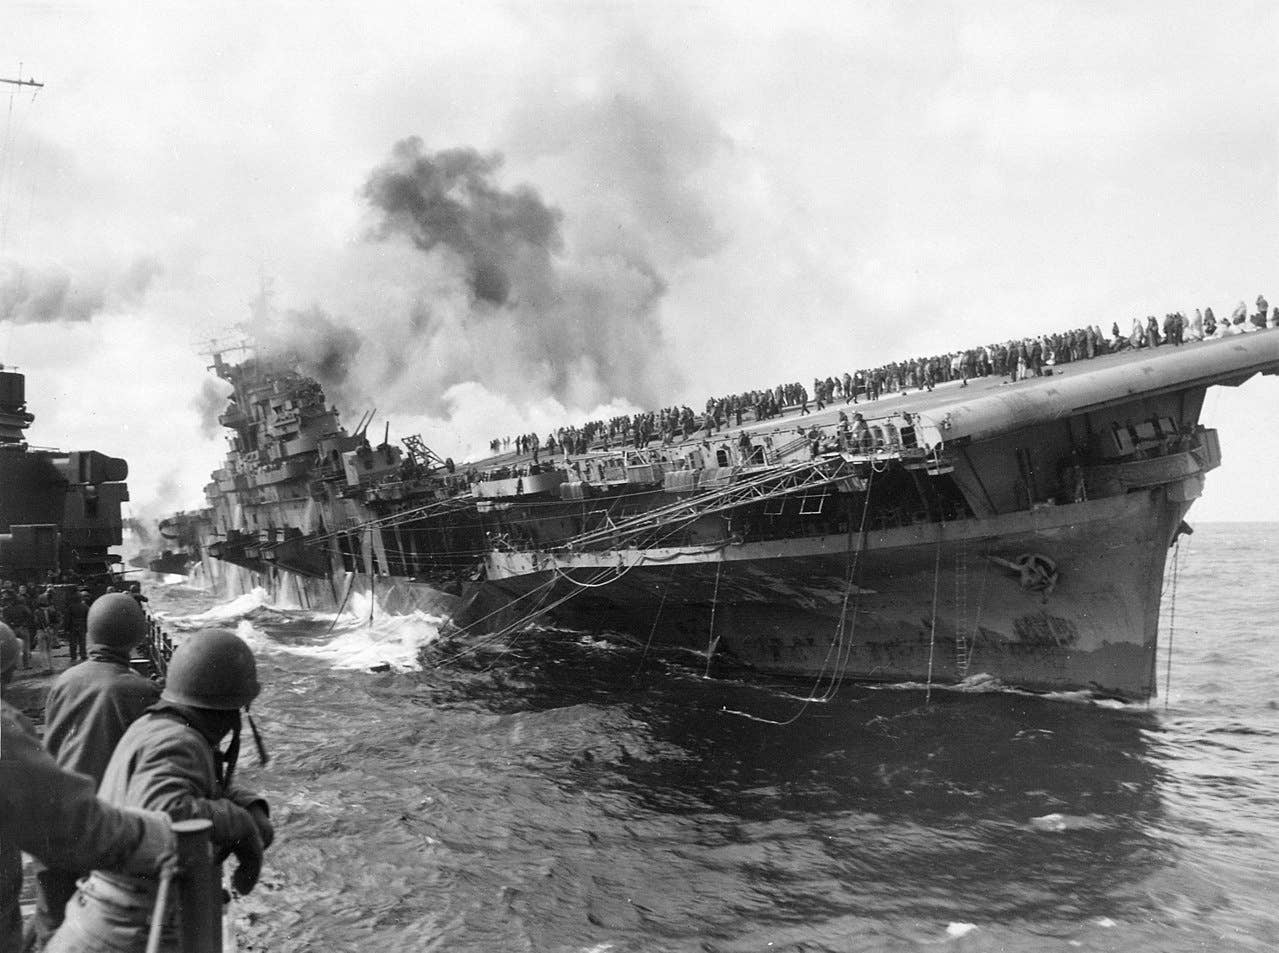 message-editor%2F1573518014186-1280px-attack_on_carrier_uss_franklin_19_march_1945.jpg